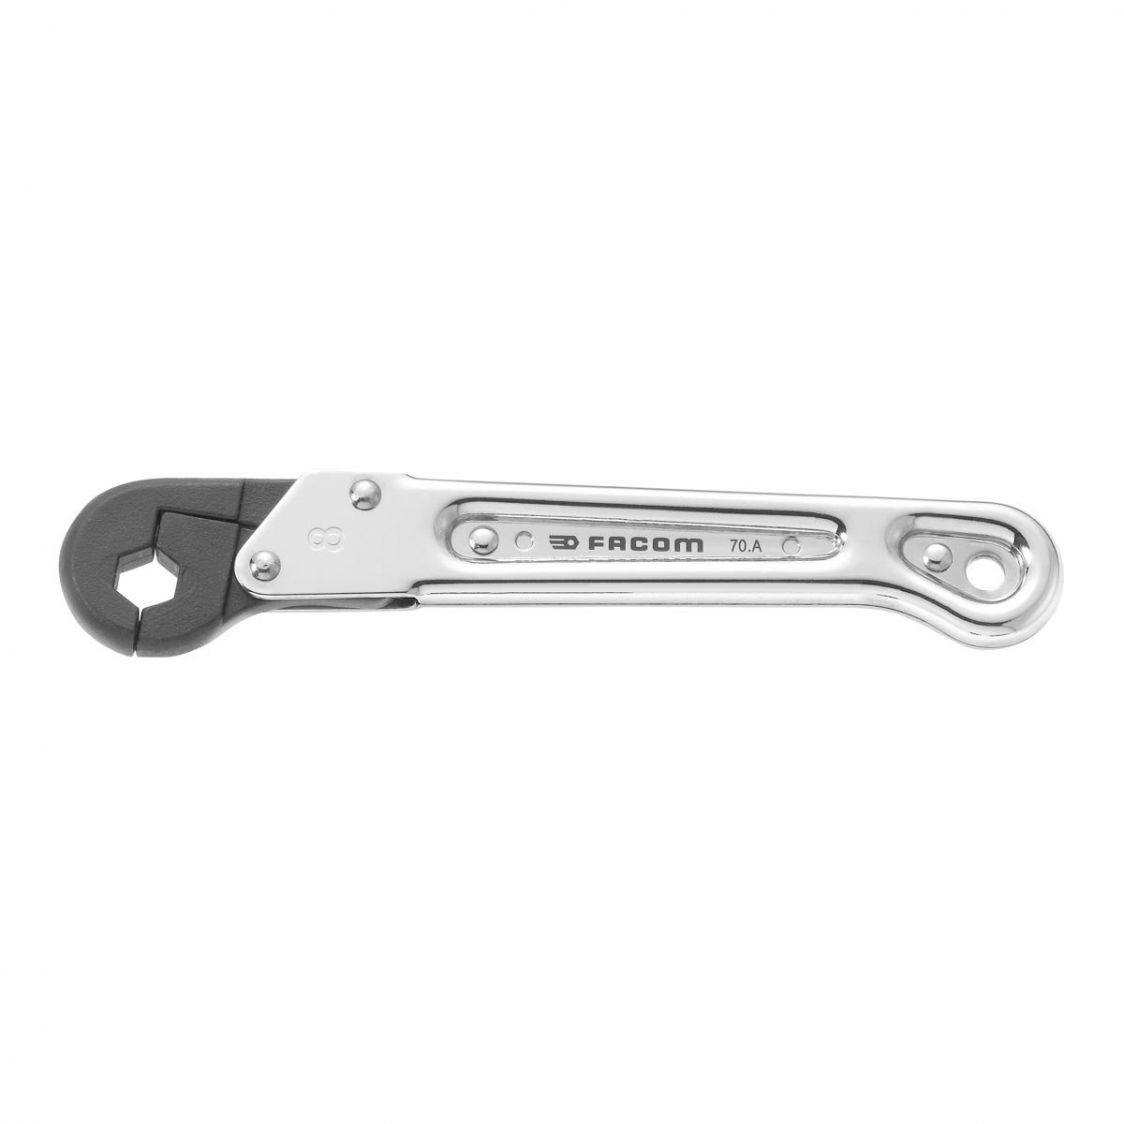 FACOM 70A.8 - 8mm Metric Ratchet Flare Nut Spanner